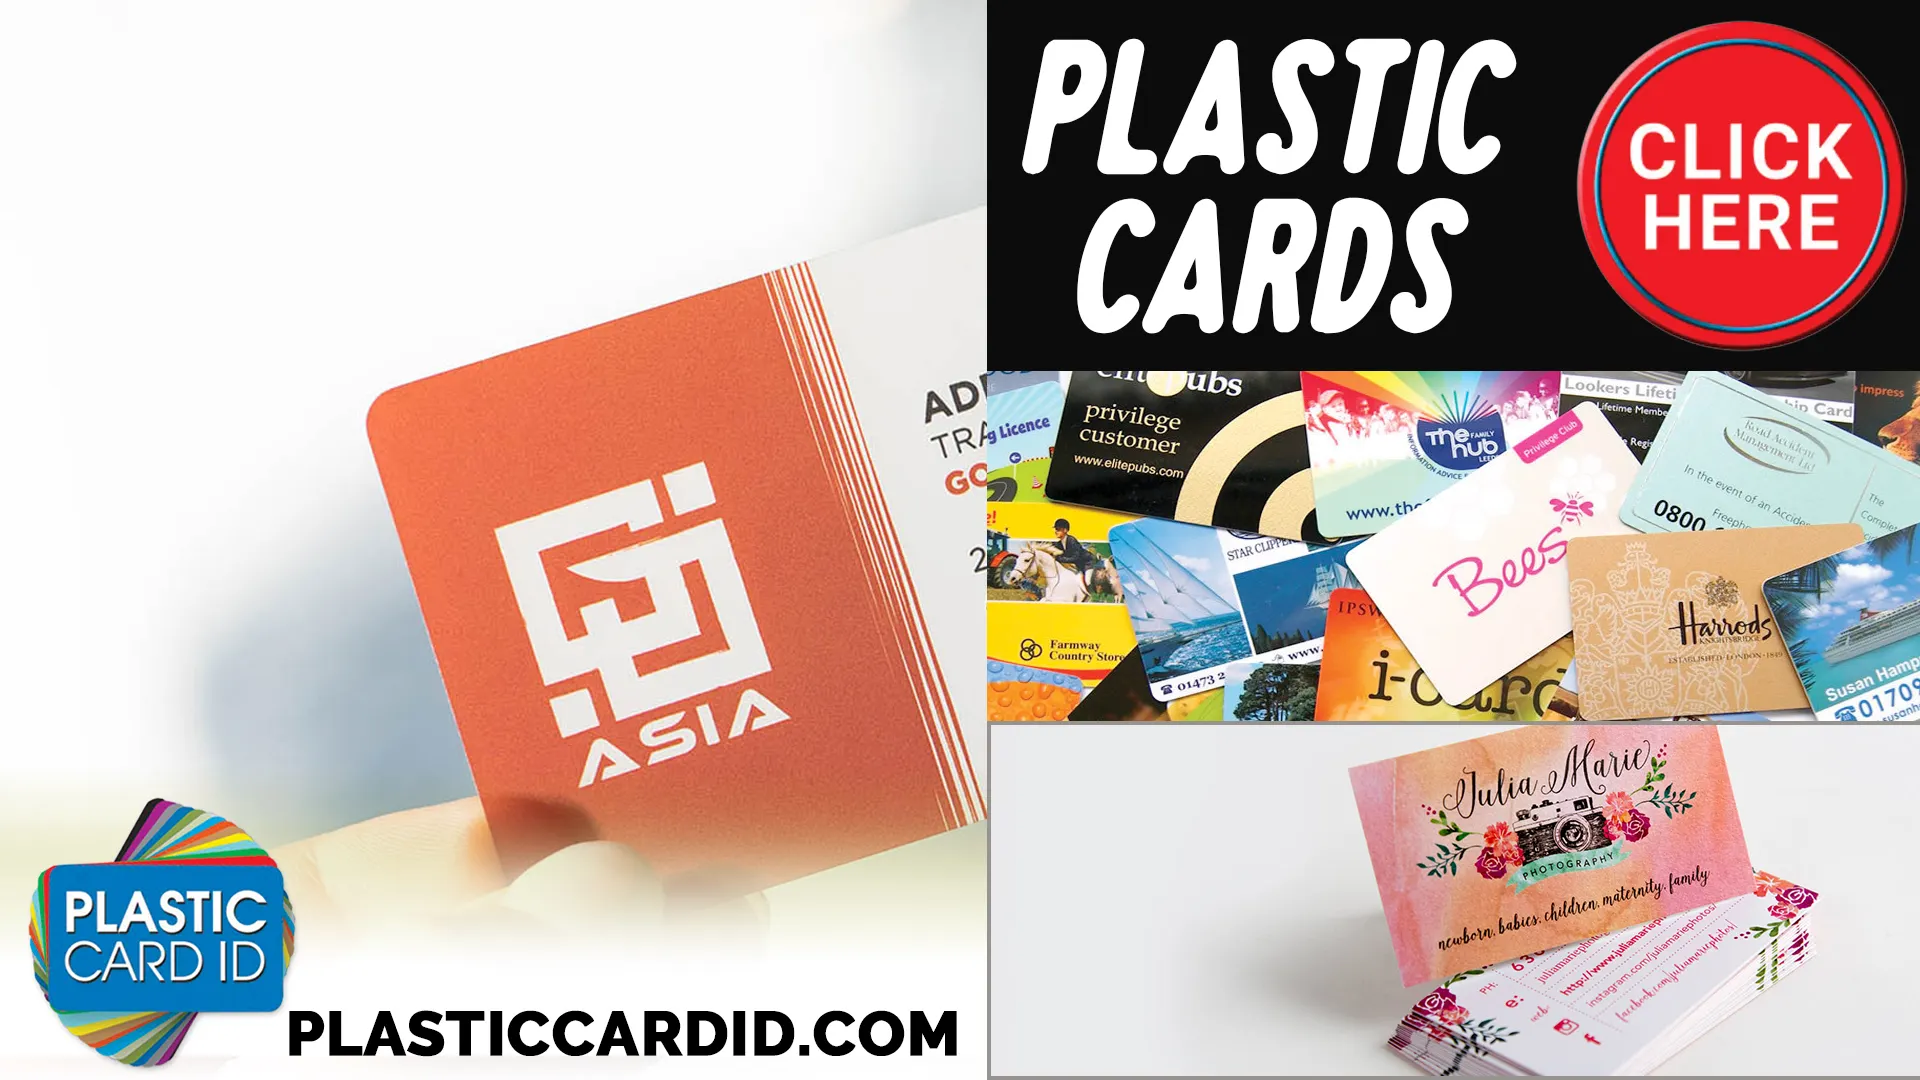 Welcome to Plastic Card ID




: Your Partner in High-Quality Plastic Card Production